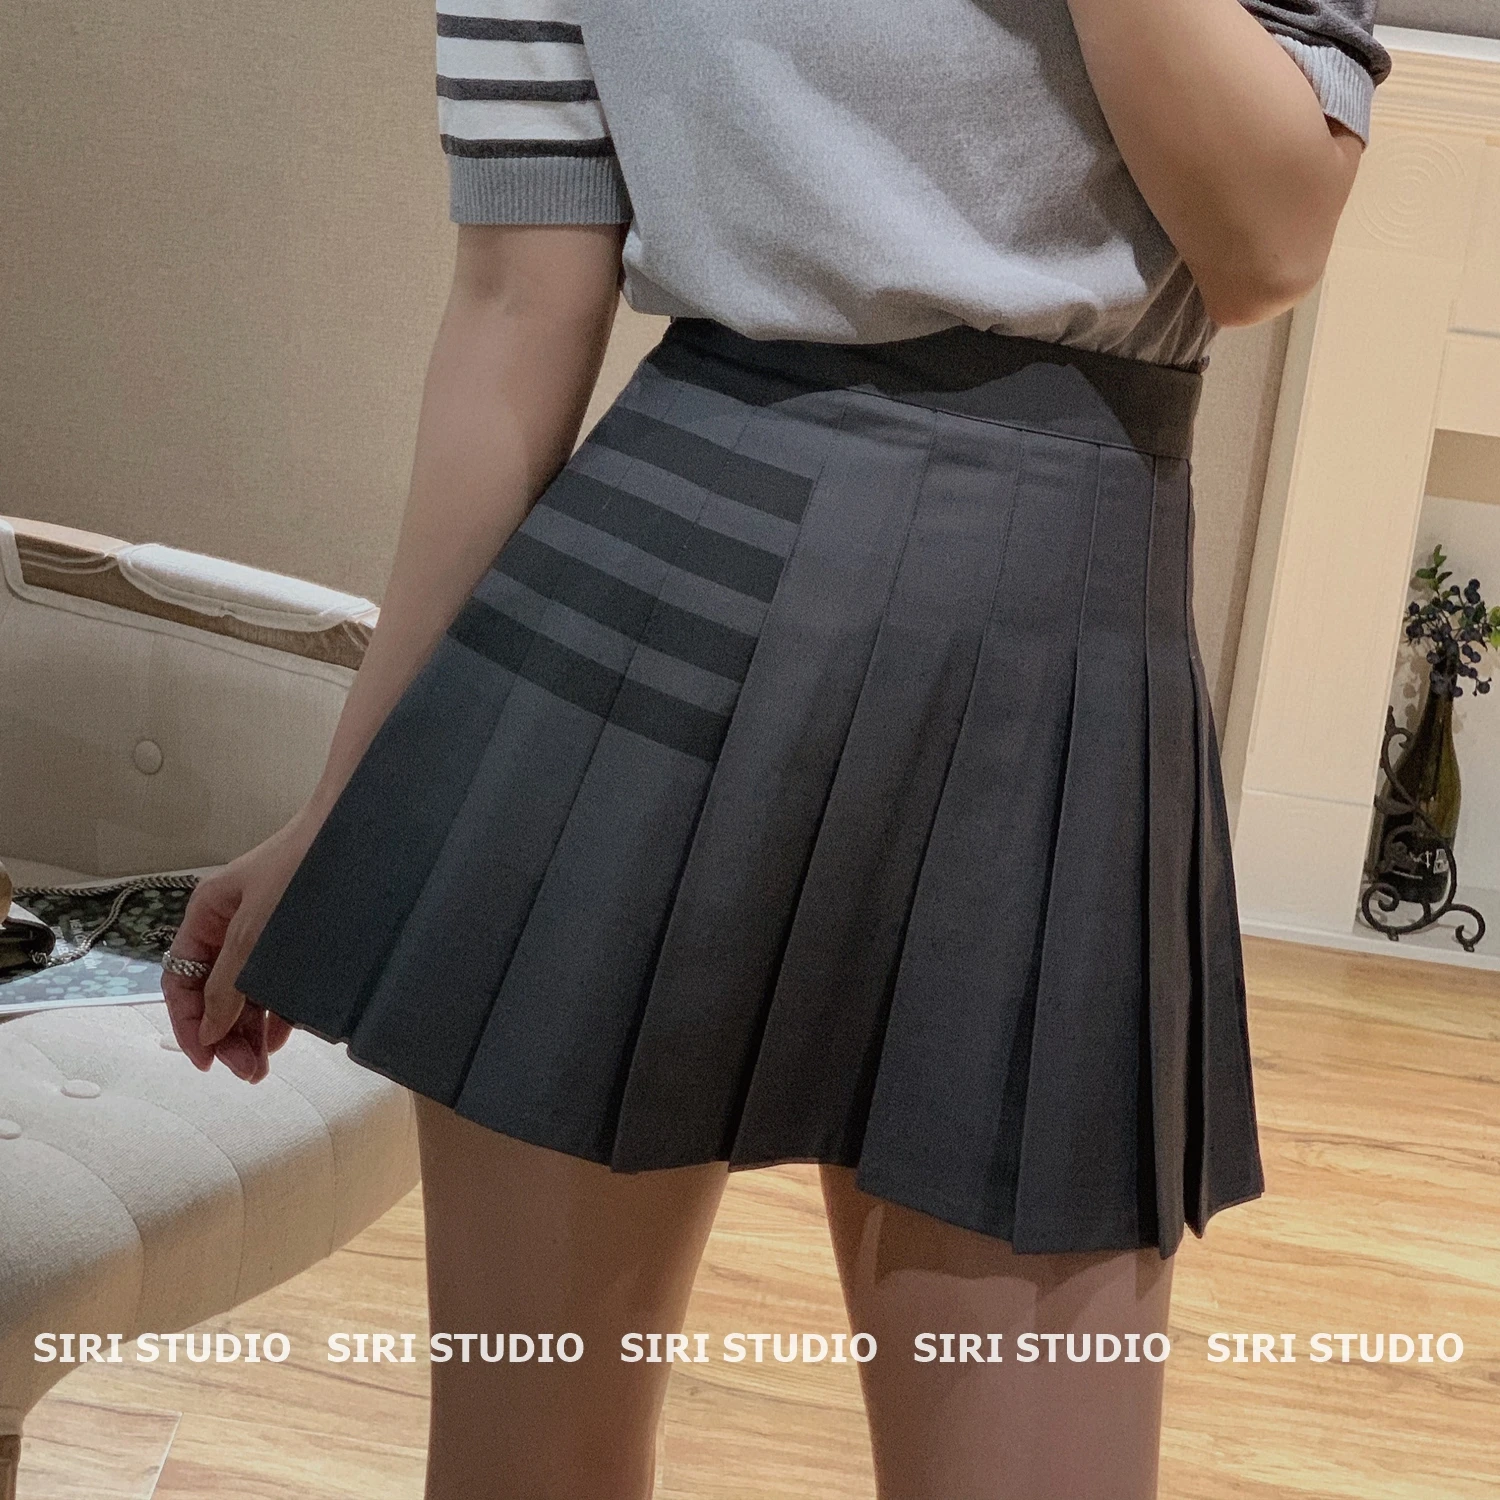 tb gray suit skirt high waist and thin A-line pleated skirt college style retro four-bar striped short skirt skirt women new tl074 tl074cn in line dip 14 four operational amplifier jfet